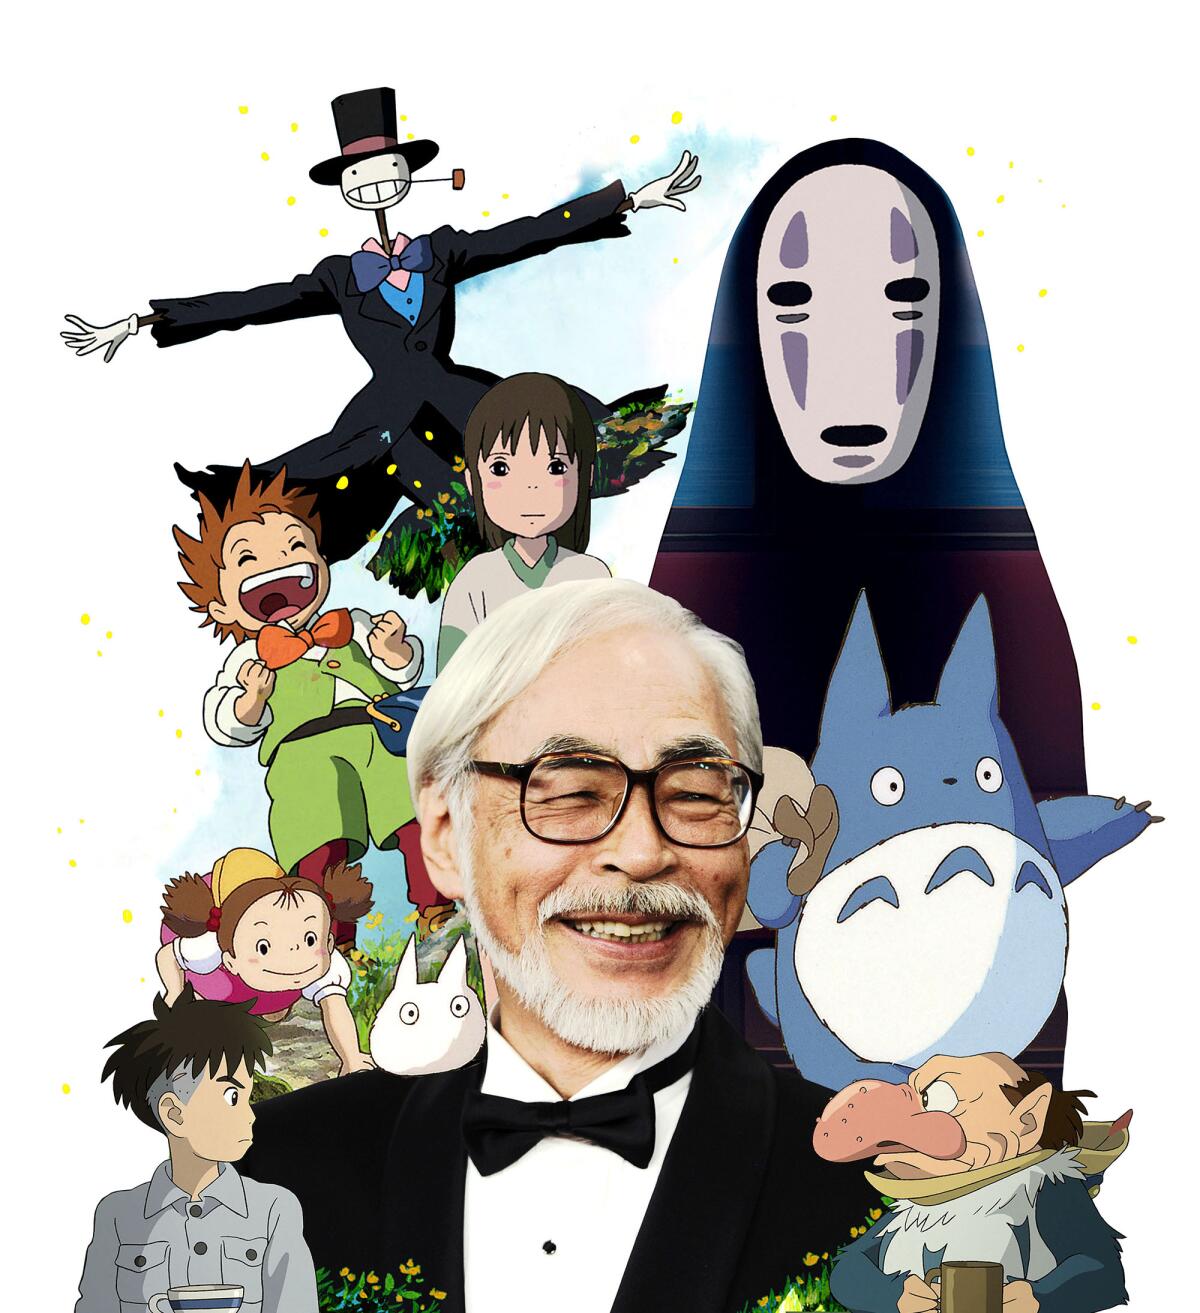 A photo collage of animation director Hayao Miyazaki surrounded by figures from his films.